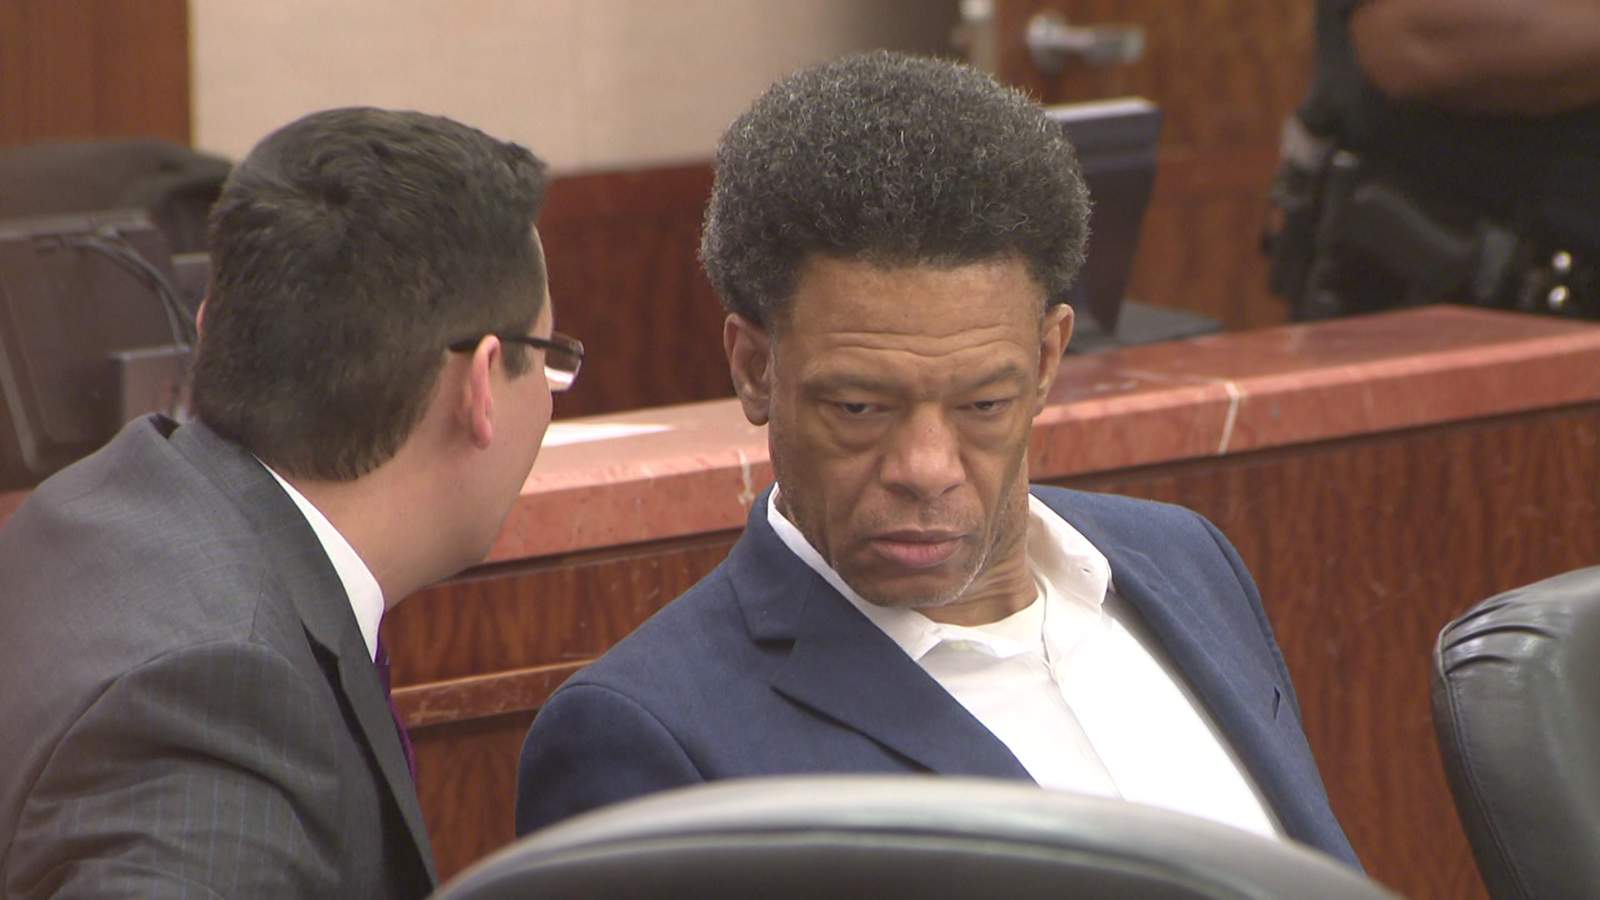 Houston serial killer, Lucky Ward, sentenced to death for strangling 4 people